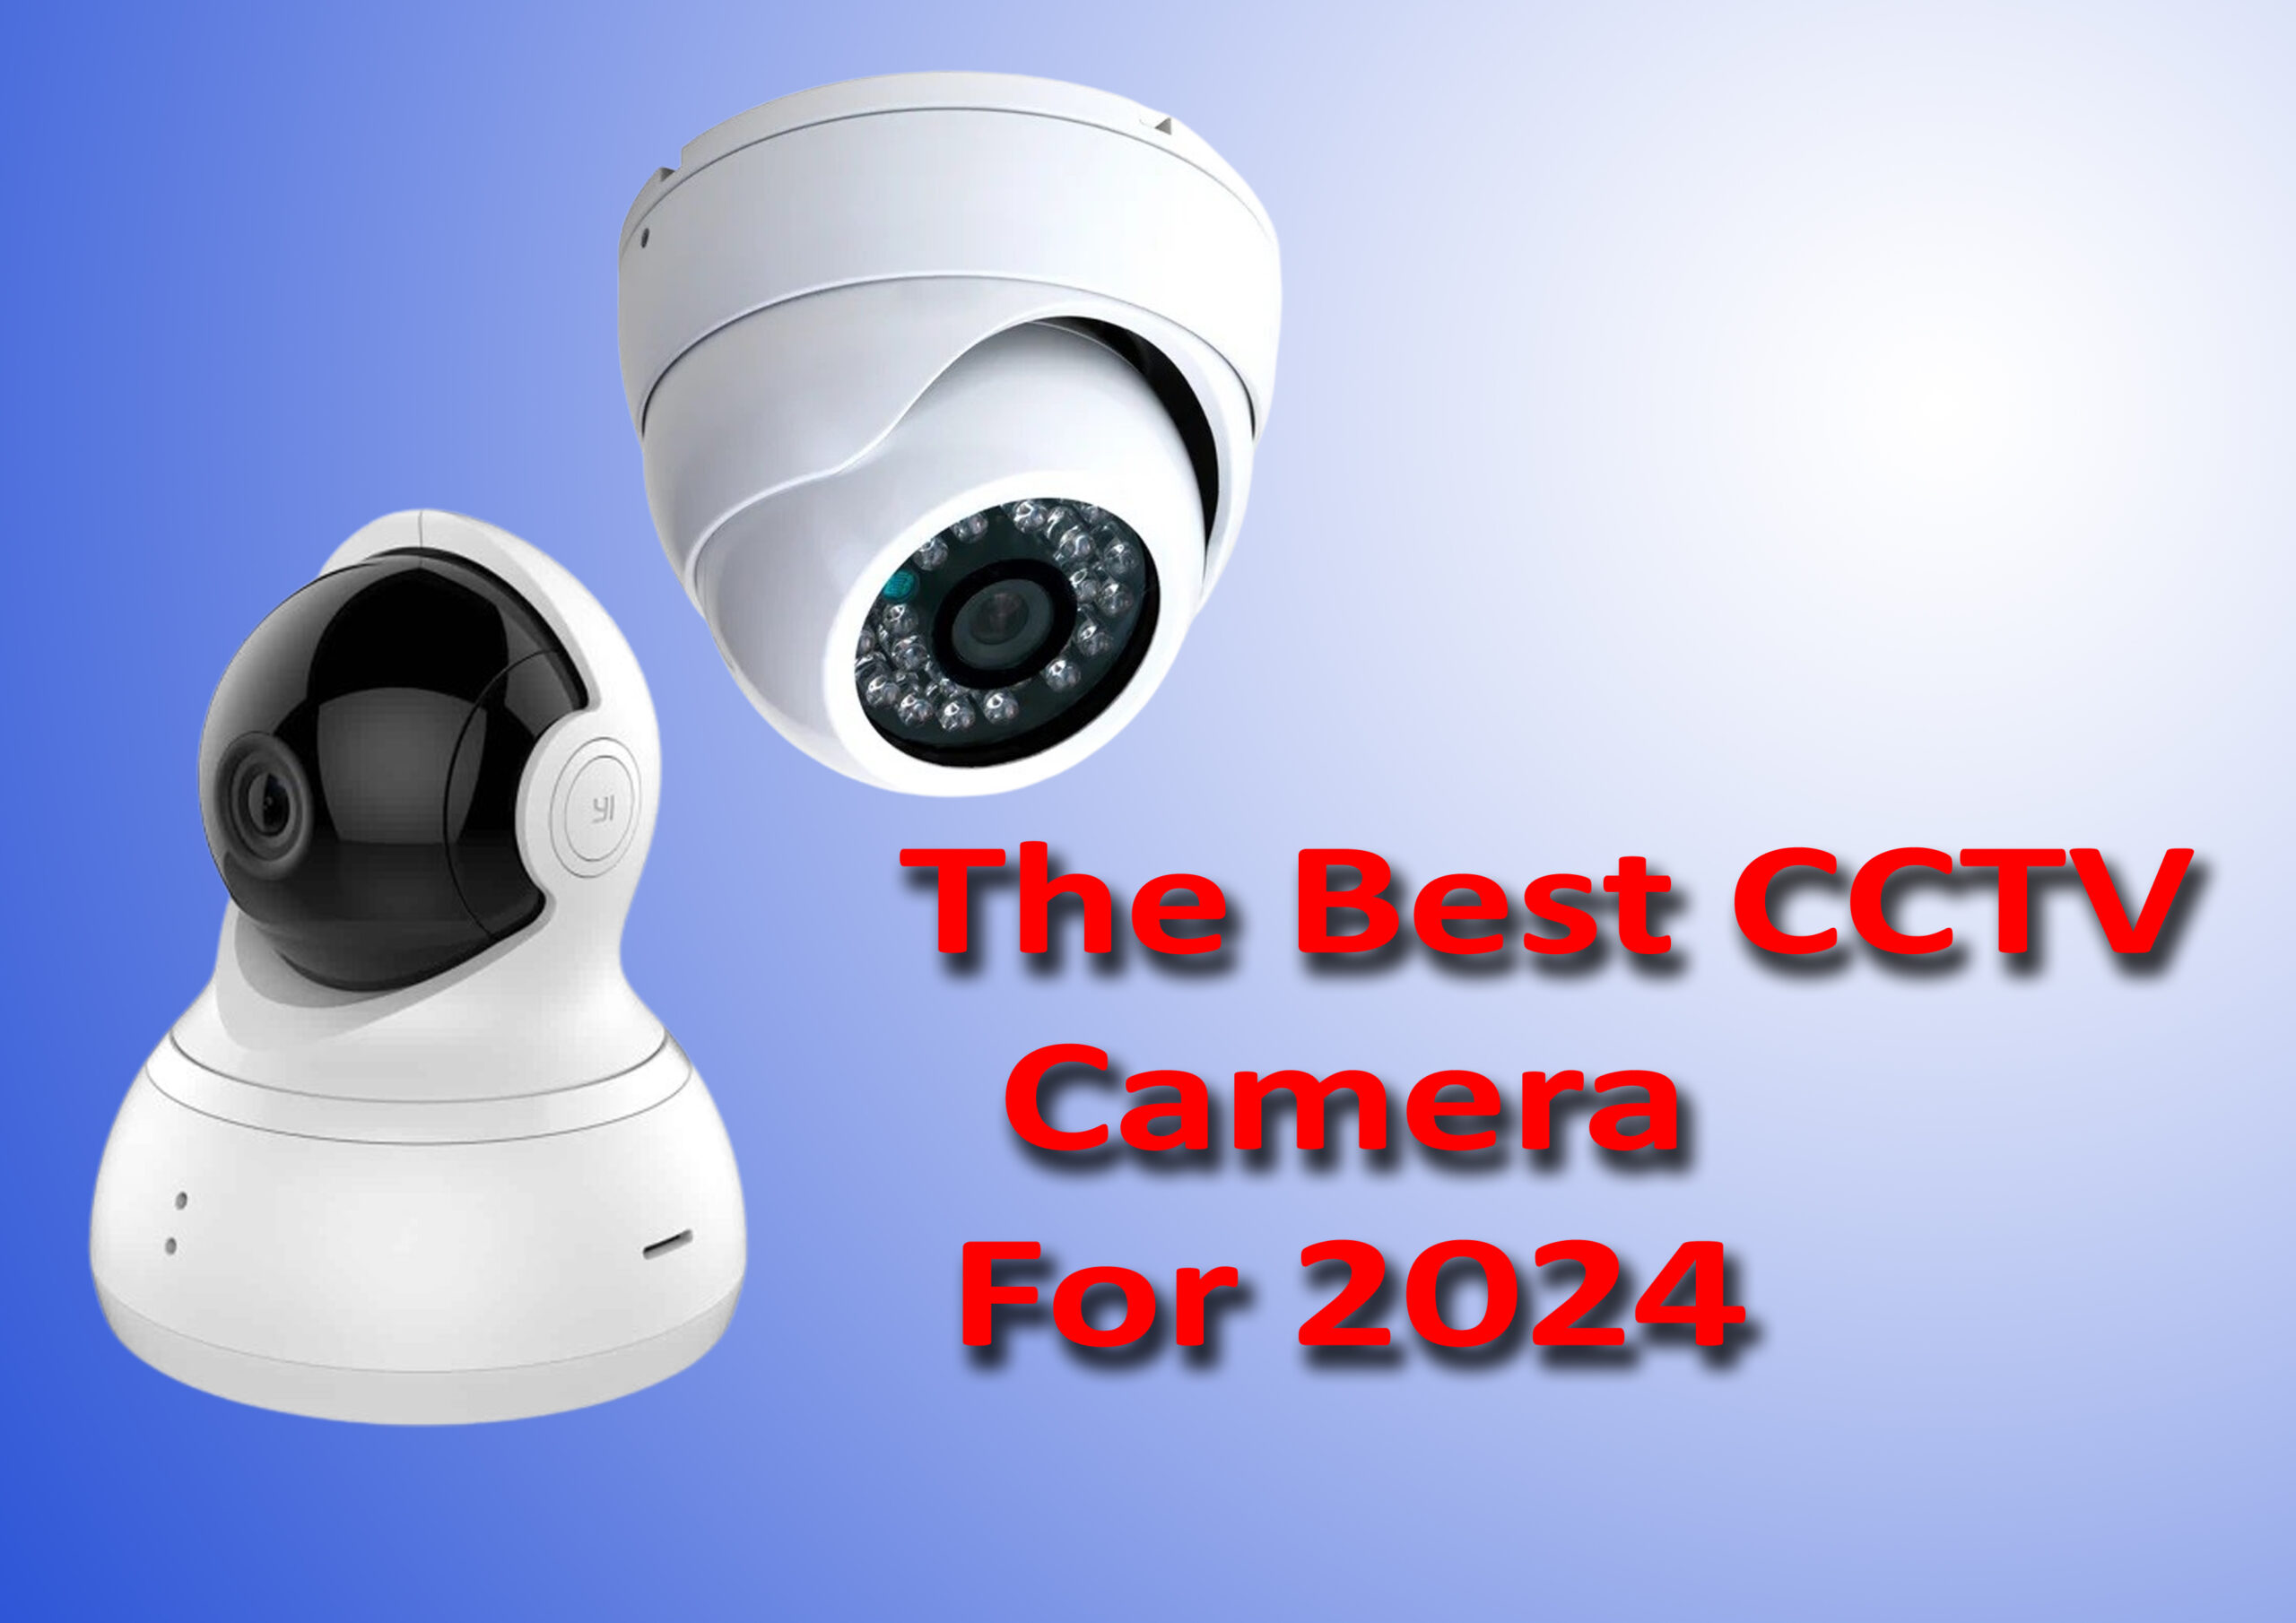 The Best CCTV Camera for 2024